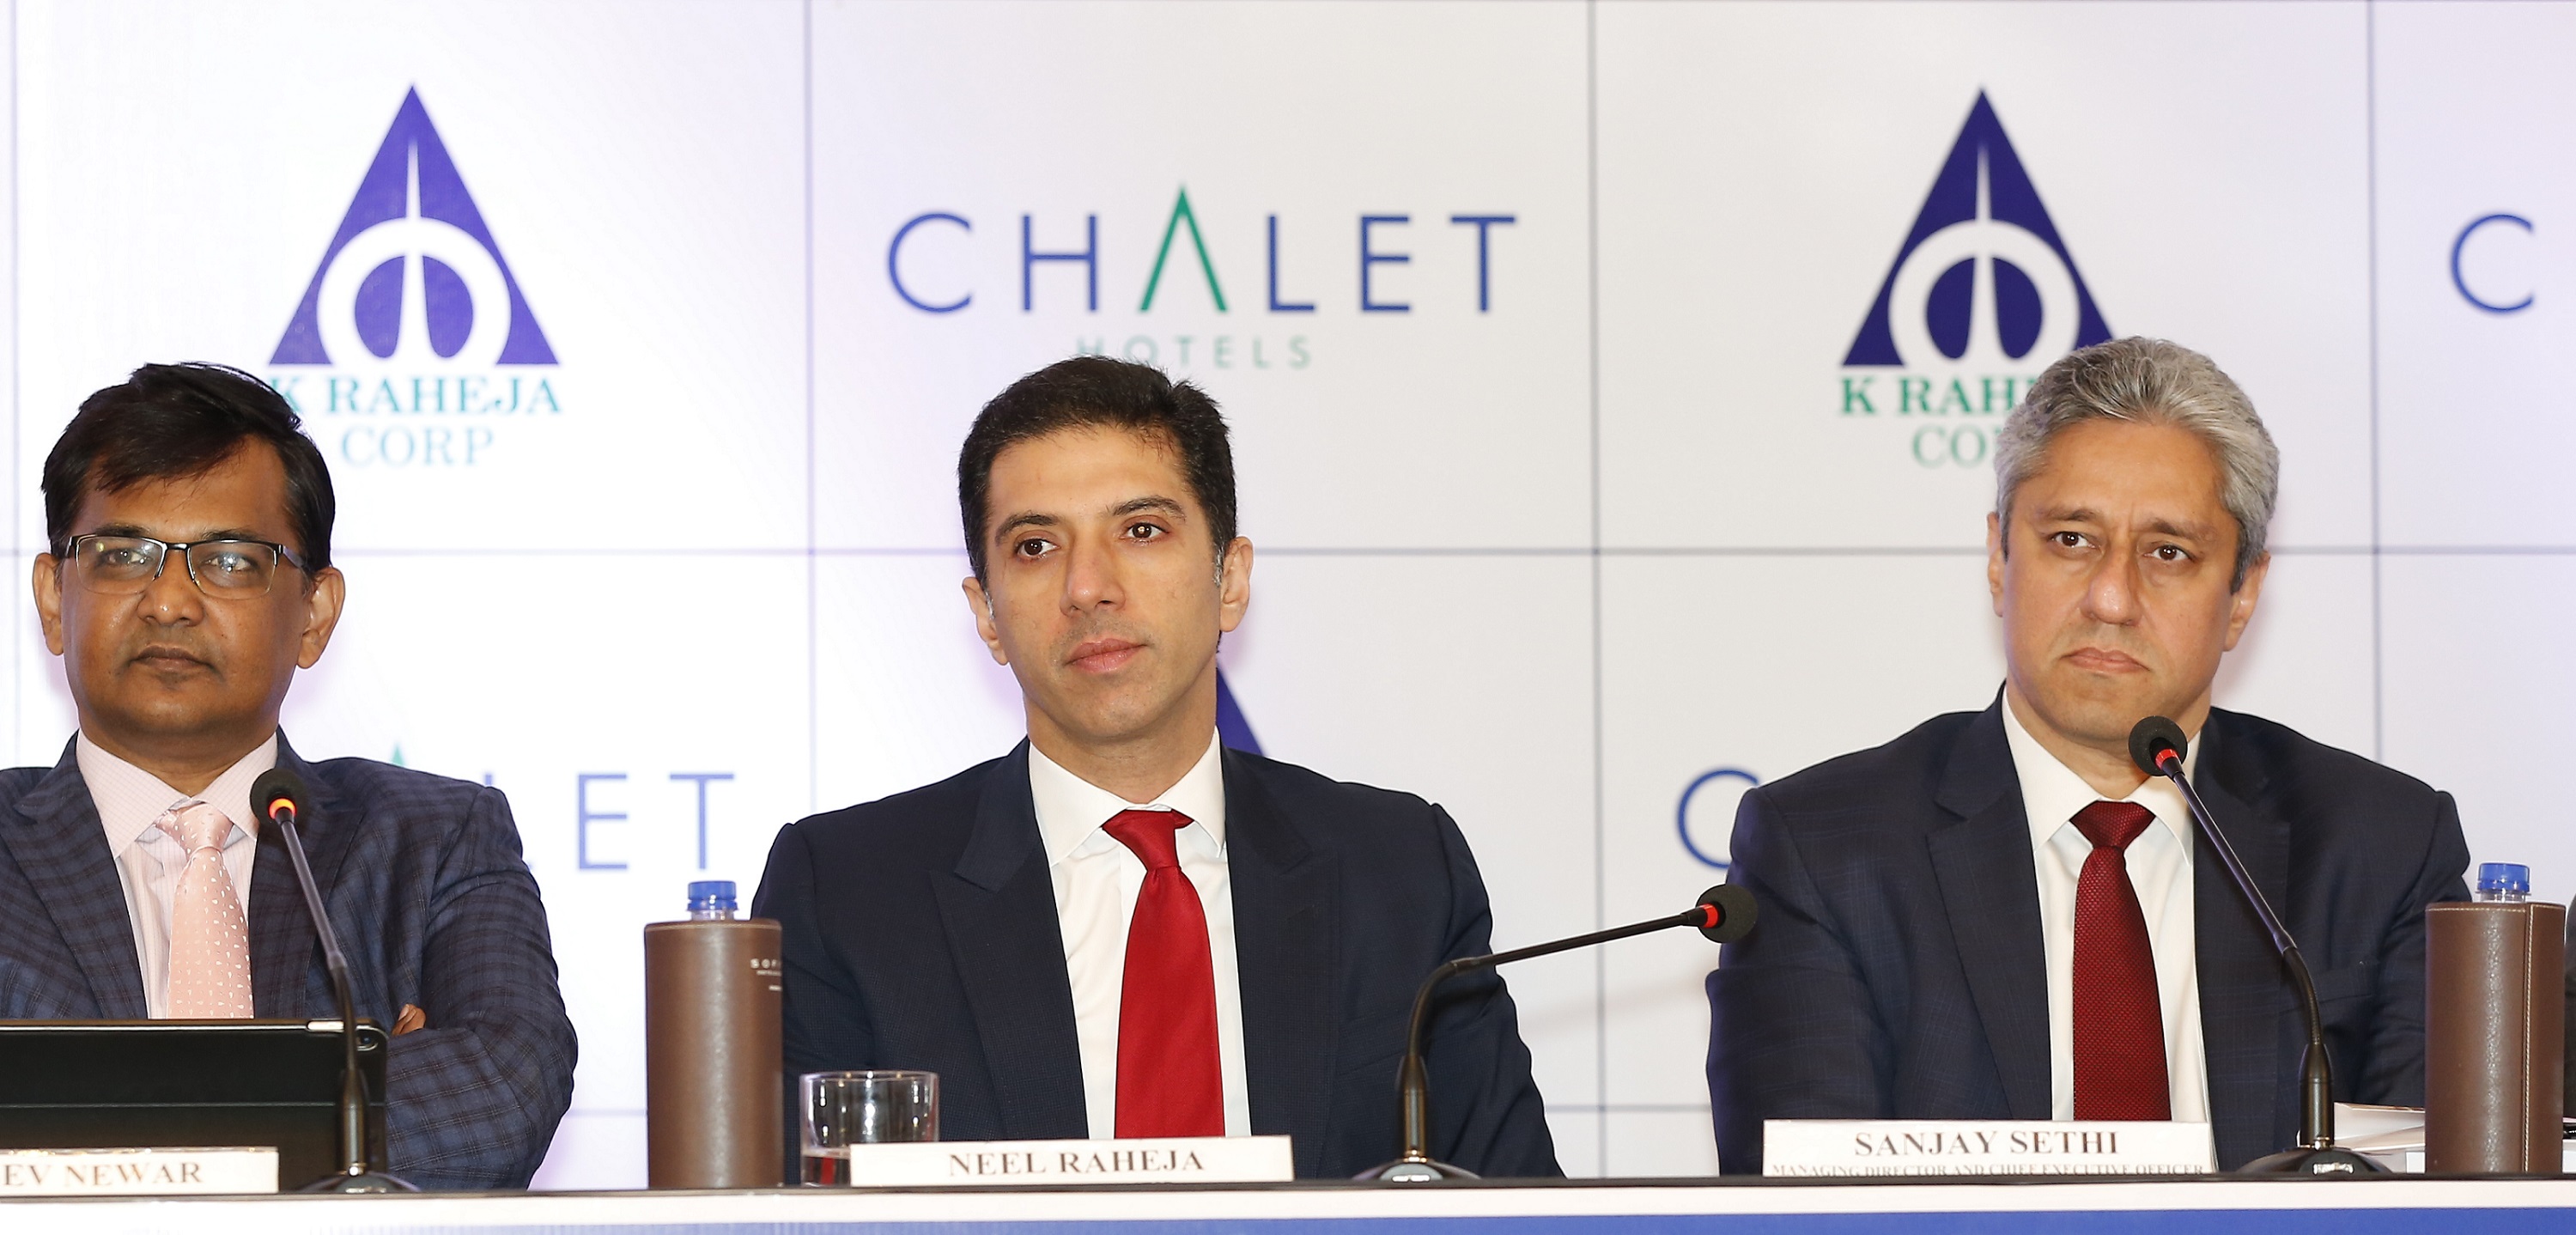 (L-R): Mr. Rajeev Newar (Executive Director and Chief Financial Officer, Chalet Hotels Limited), Mr. Neel Raheja (Promoter & Director, Chalet Hotels Limited), Mr. Sanjay Sethi (Managing Director and Chief Executive Officer, Chalet Hotels Limited) at the announcement of Chalet Hotels Limited IPO.